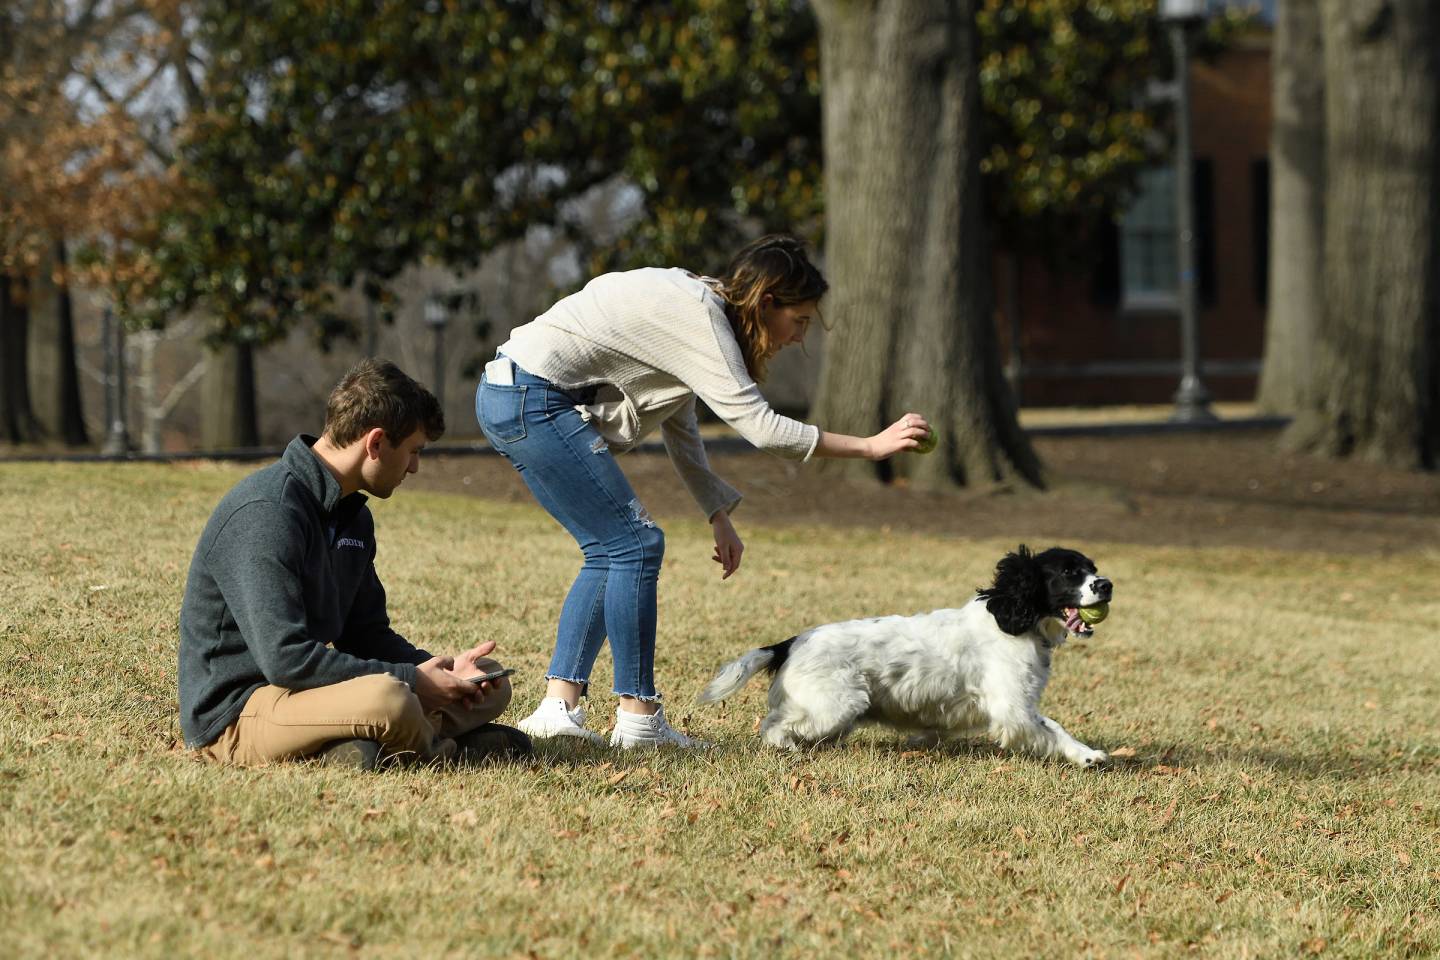 Two people play fetch with a dog